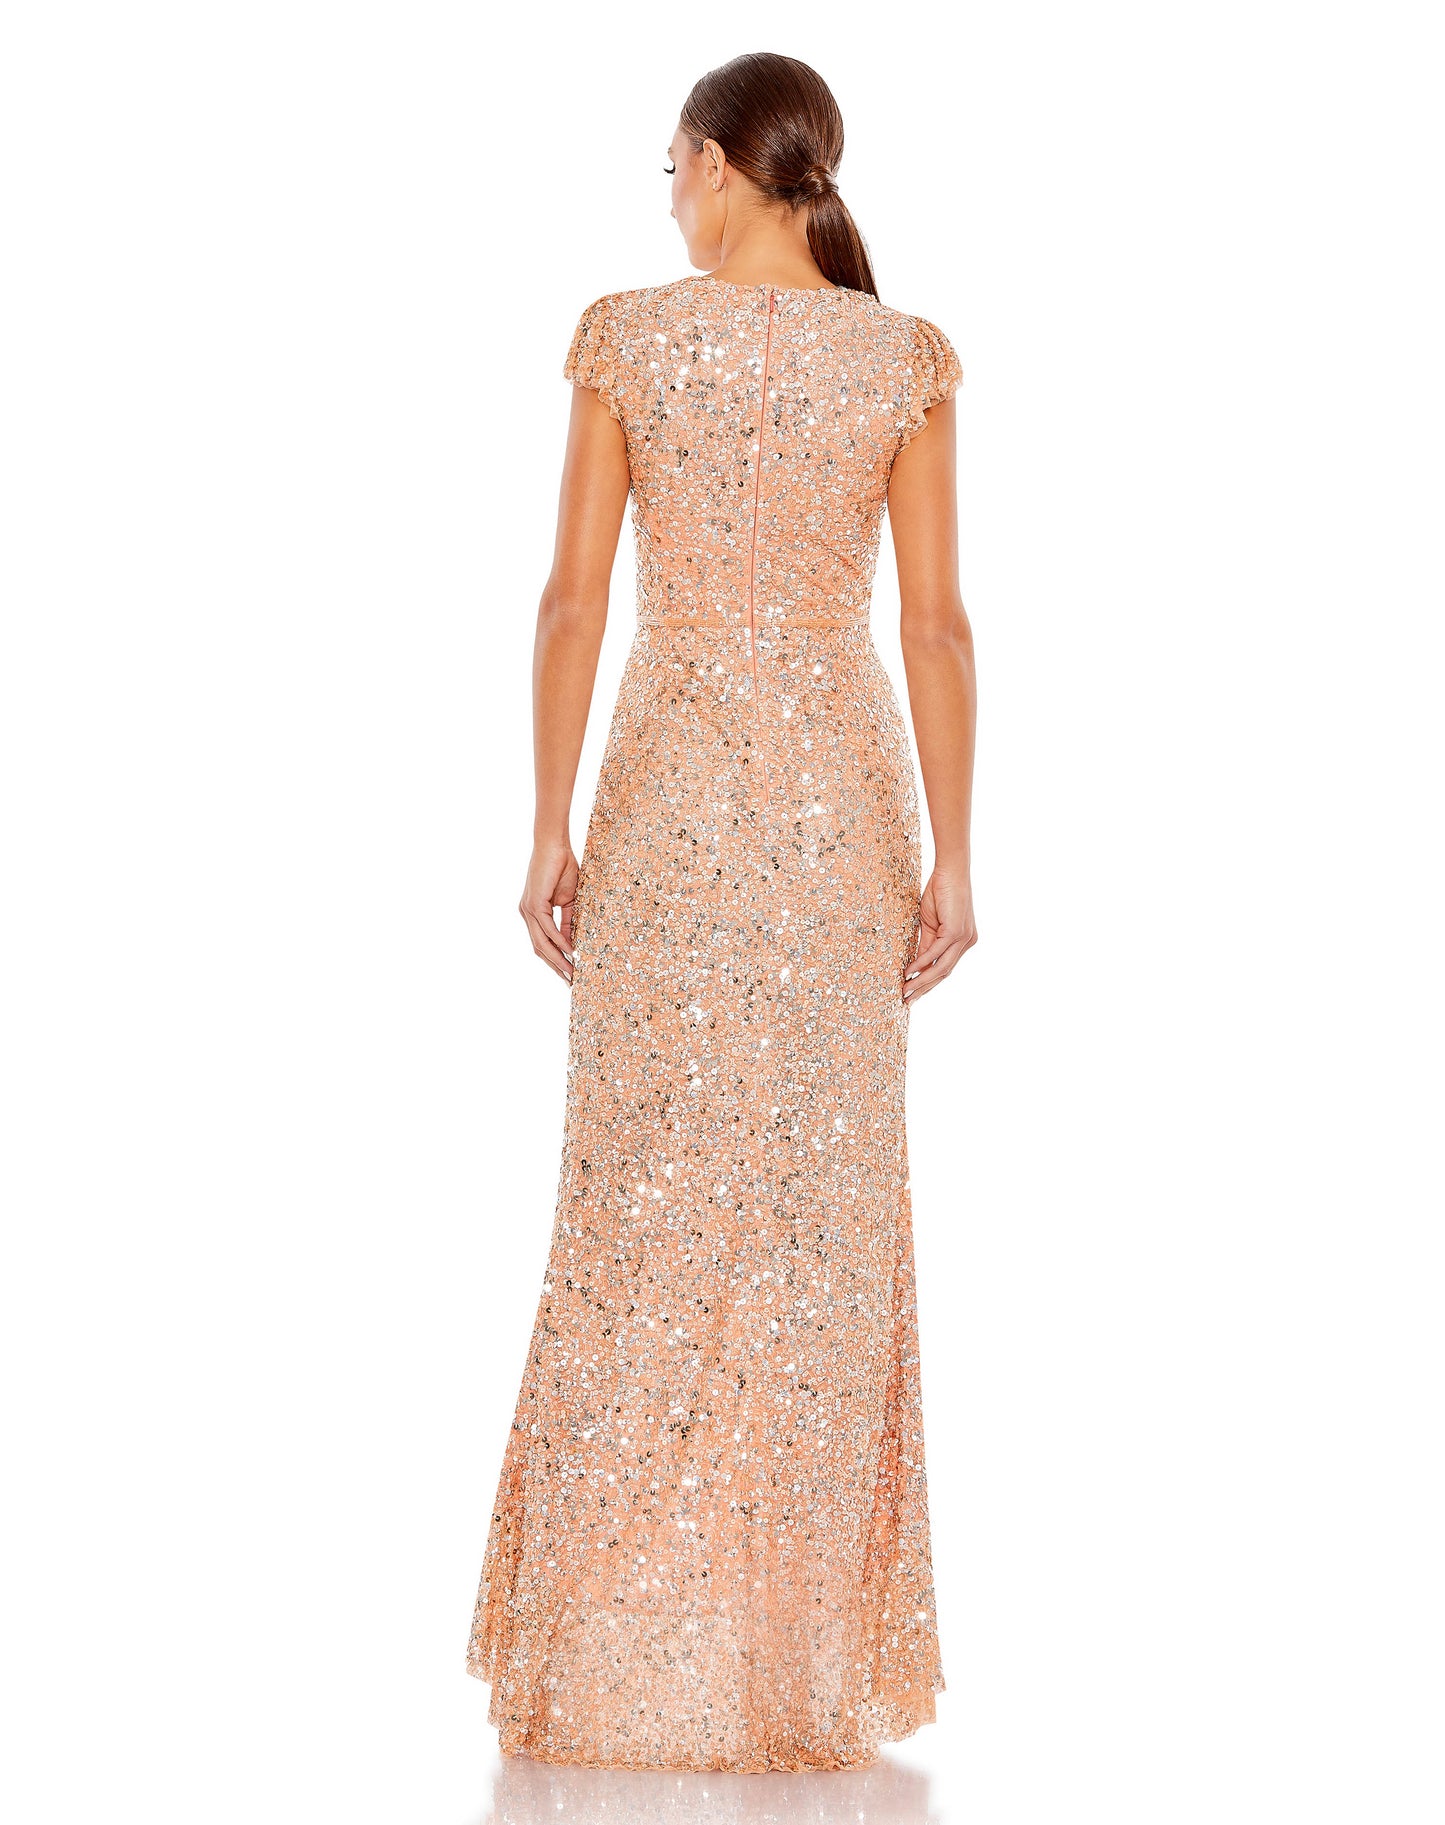 Sequined Faux Wrap Ruffle Cap Sleeve Gown